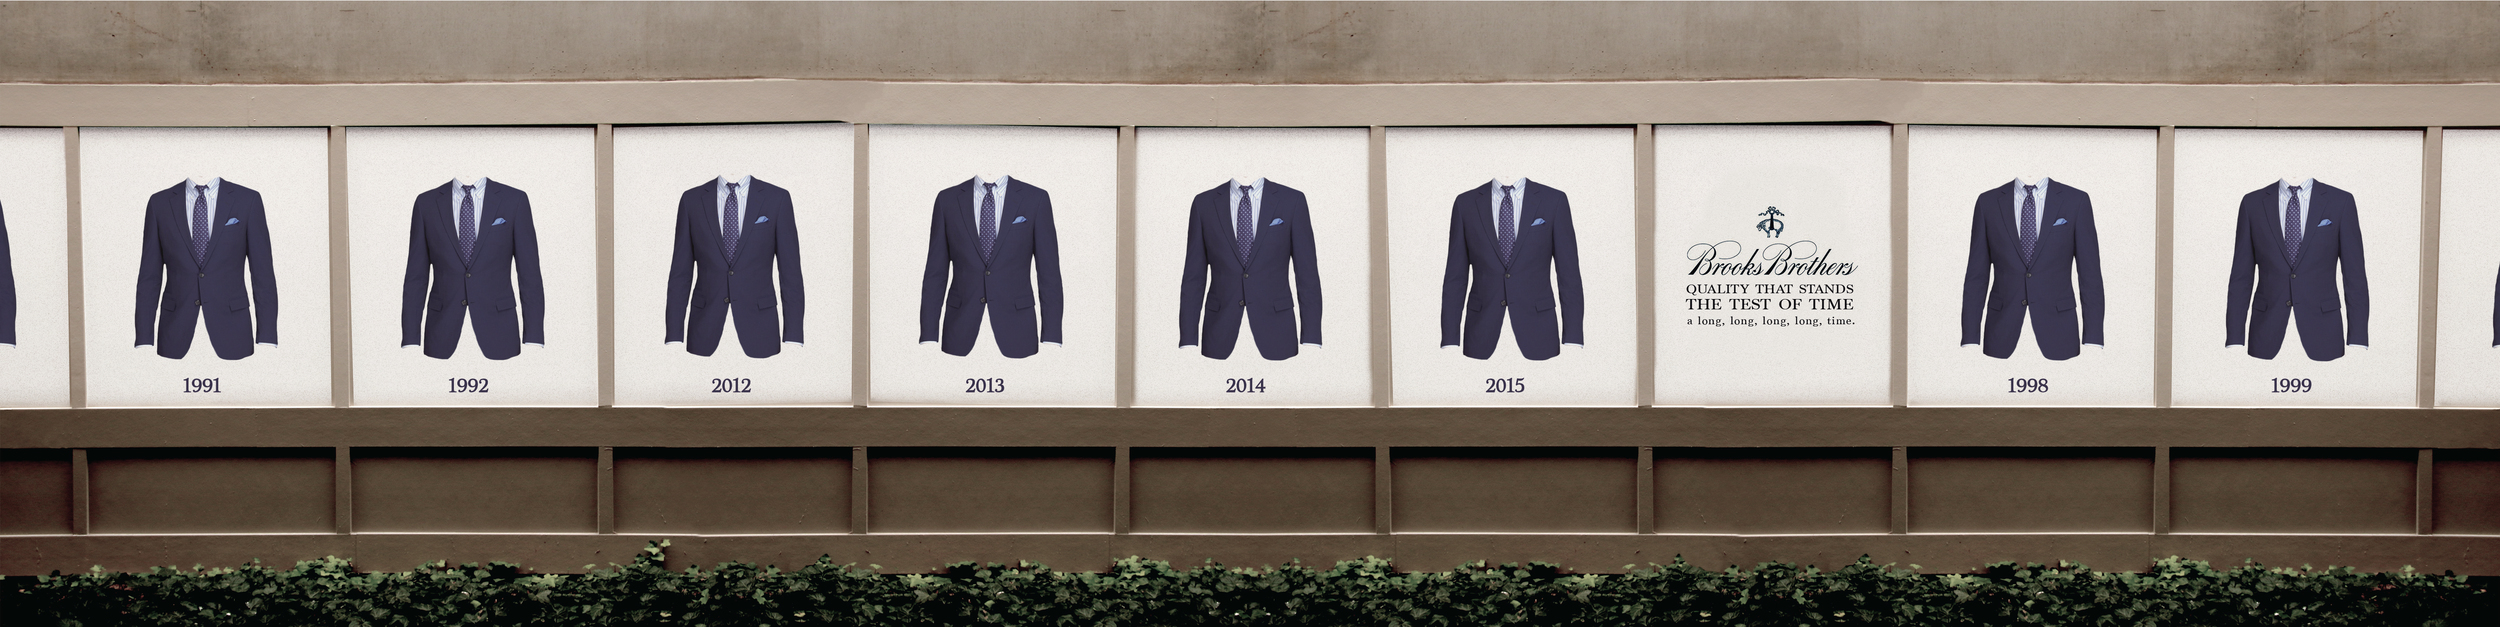 brooks-brothers-wall-quality-that-stands.jpg